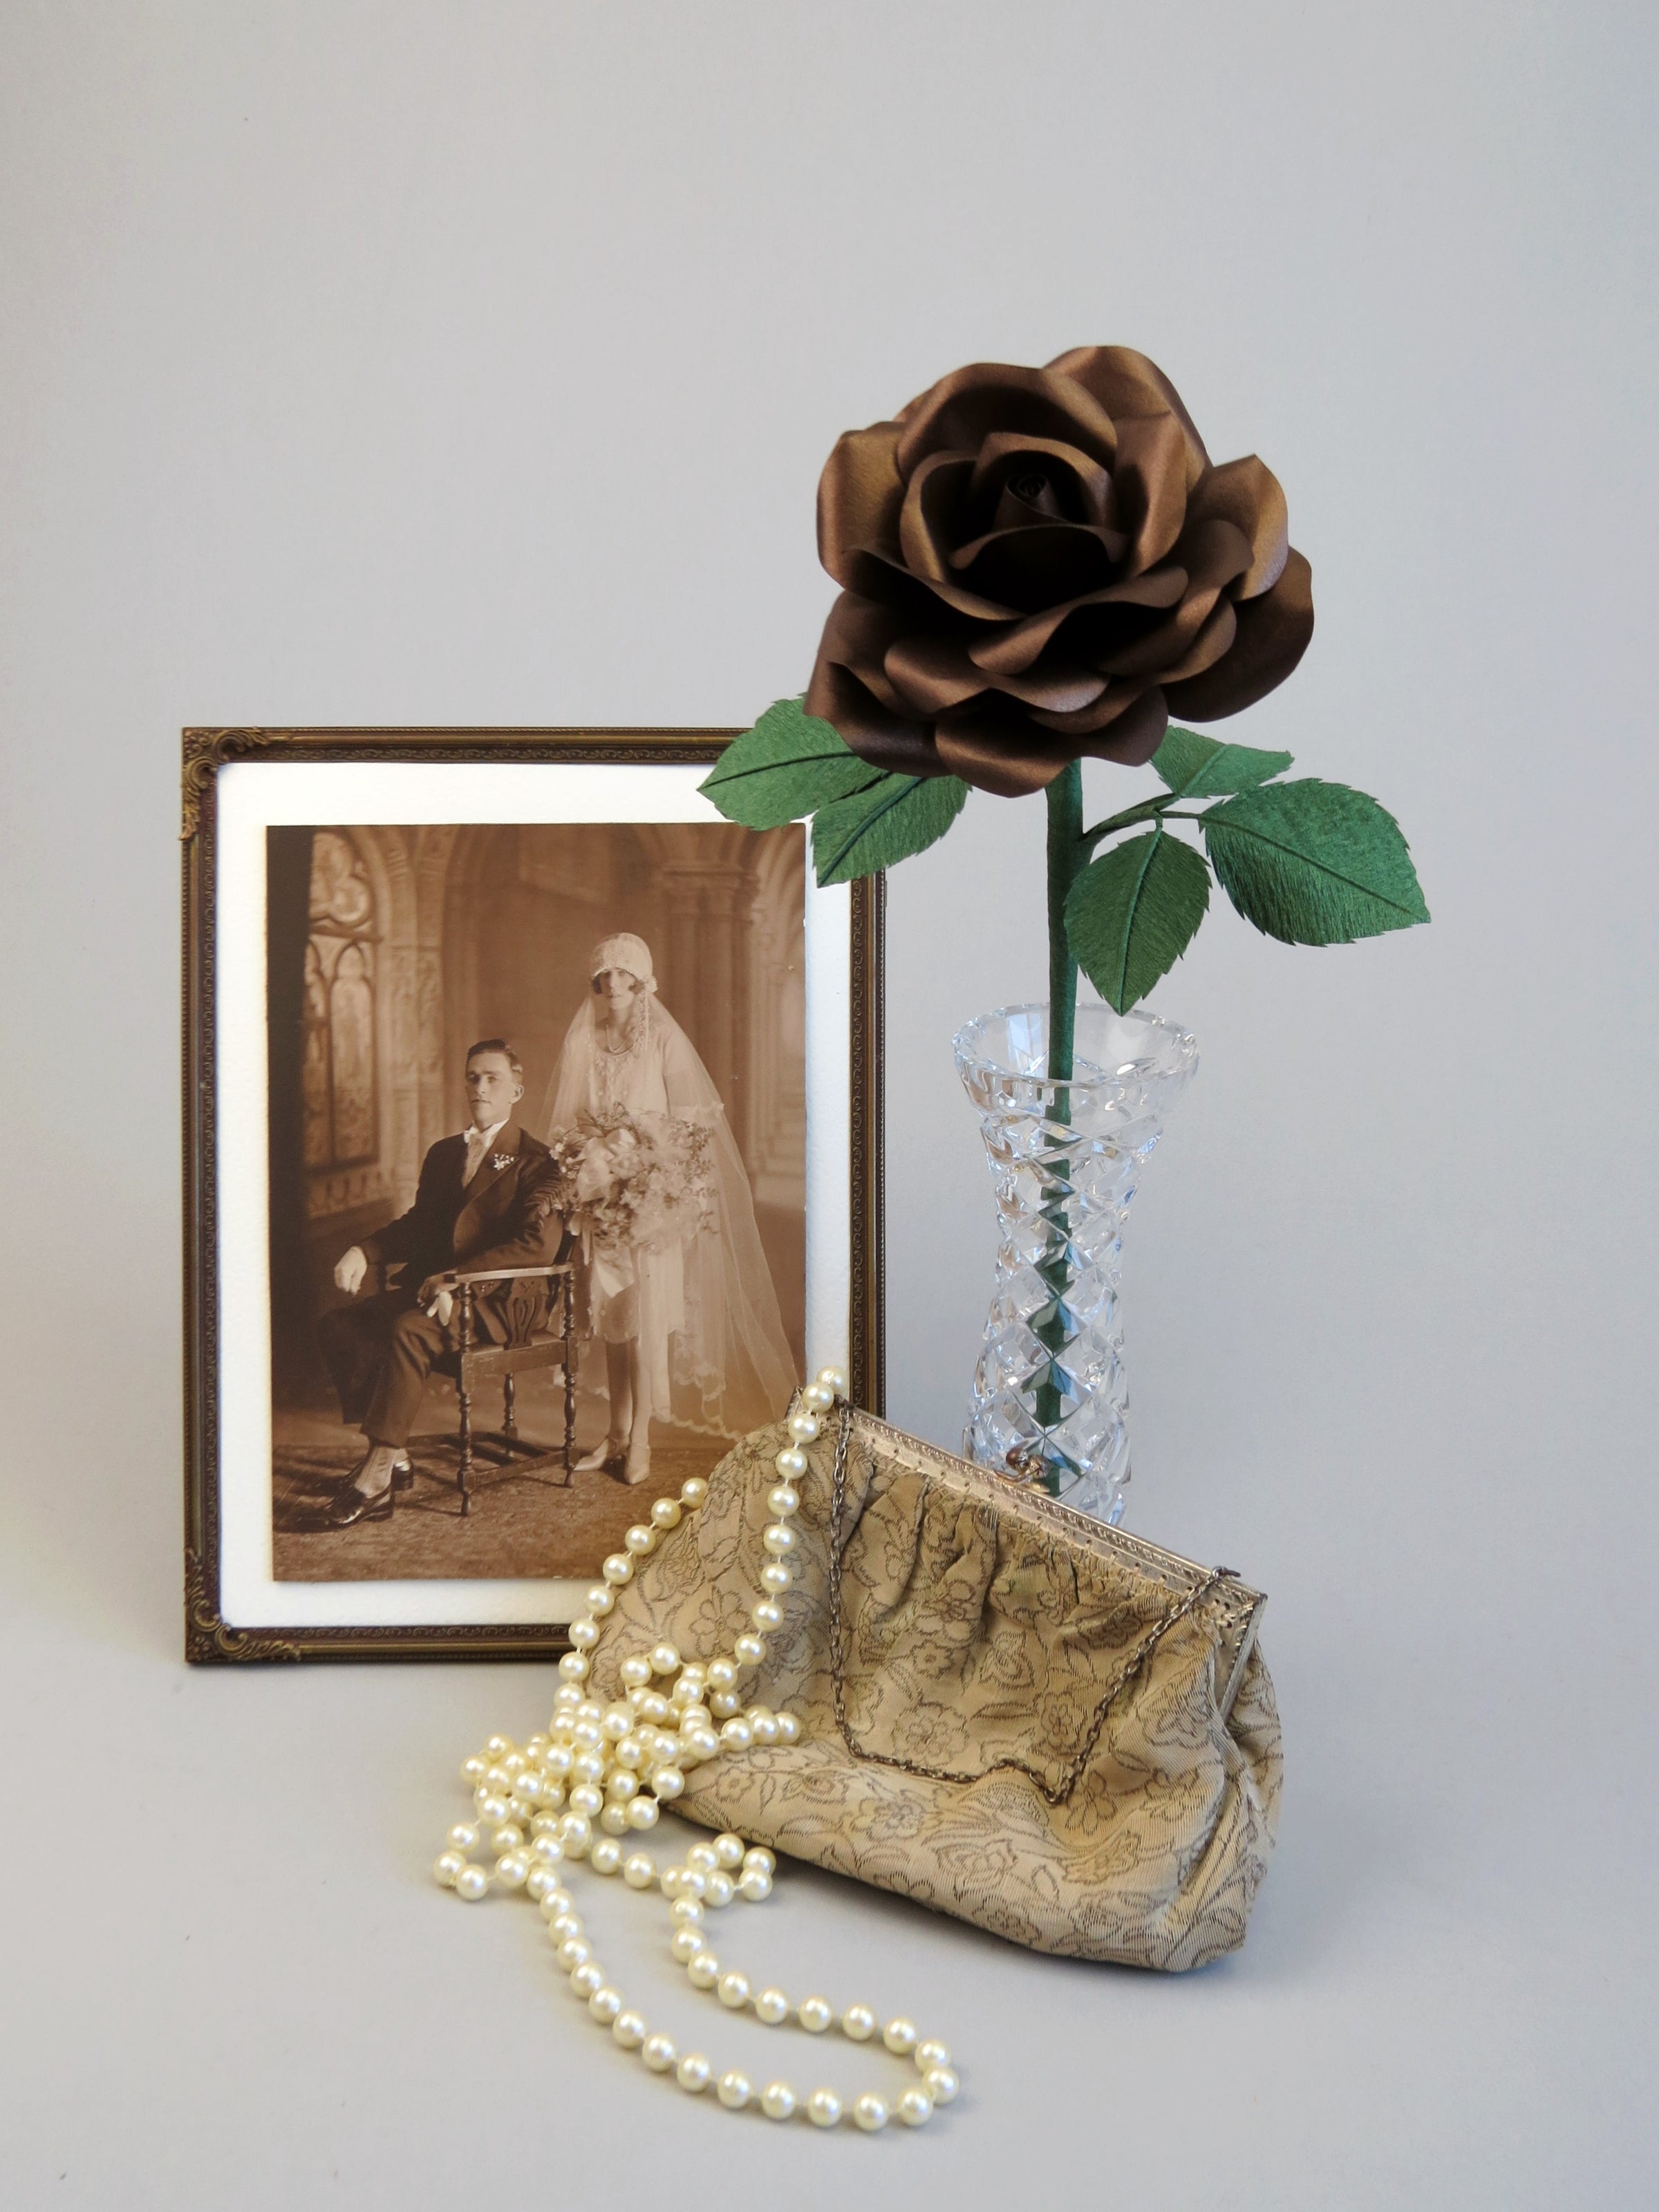 Bronze paper rose with six green leaves standing in a slender glass vase with a framed vintage wedding photo of a 1920’s bride and groom standing to the left of the vase. A cream and metallic vintage clutch rests against the front base of the vase with a long pearl necklace draped over it. 